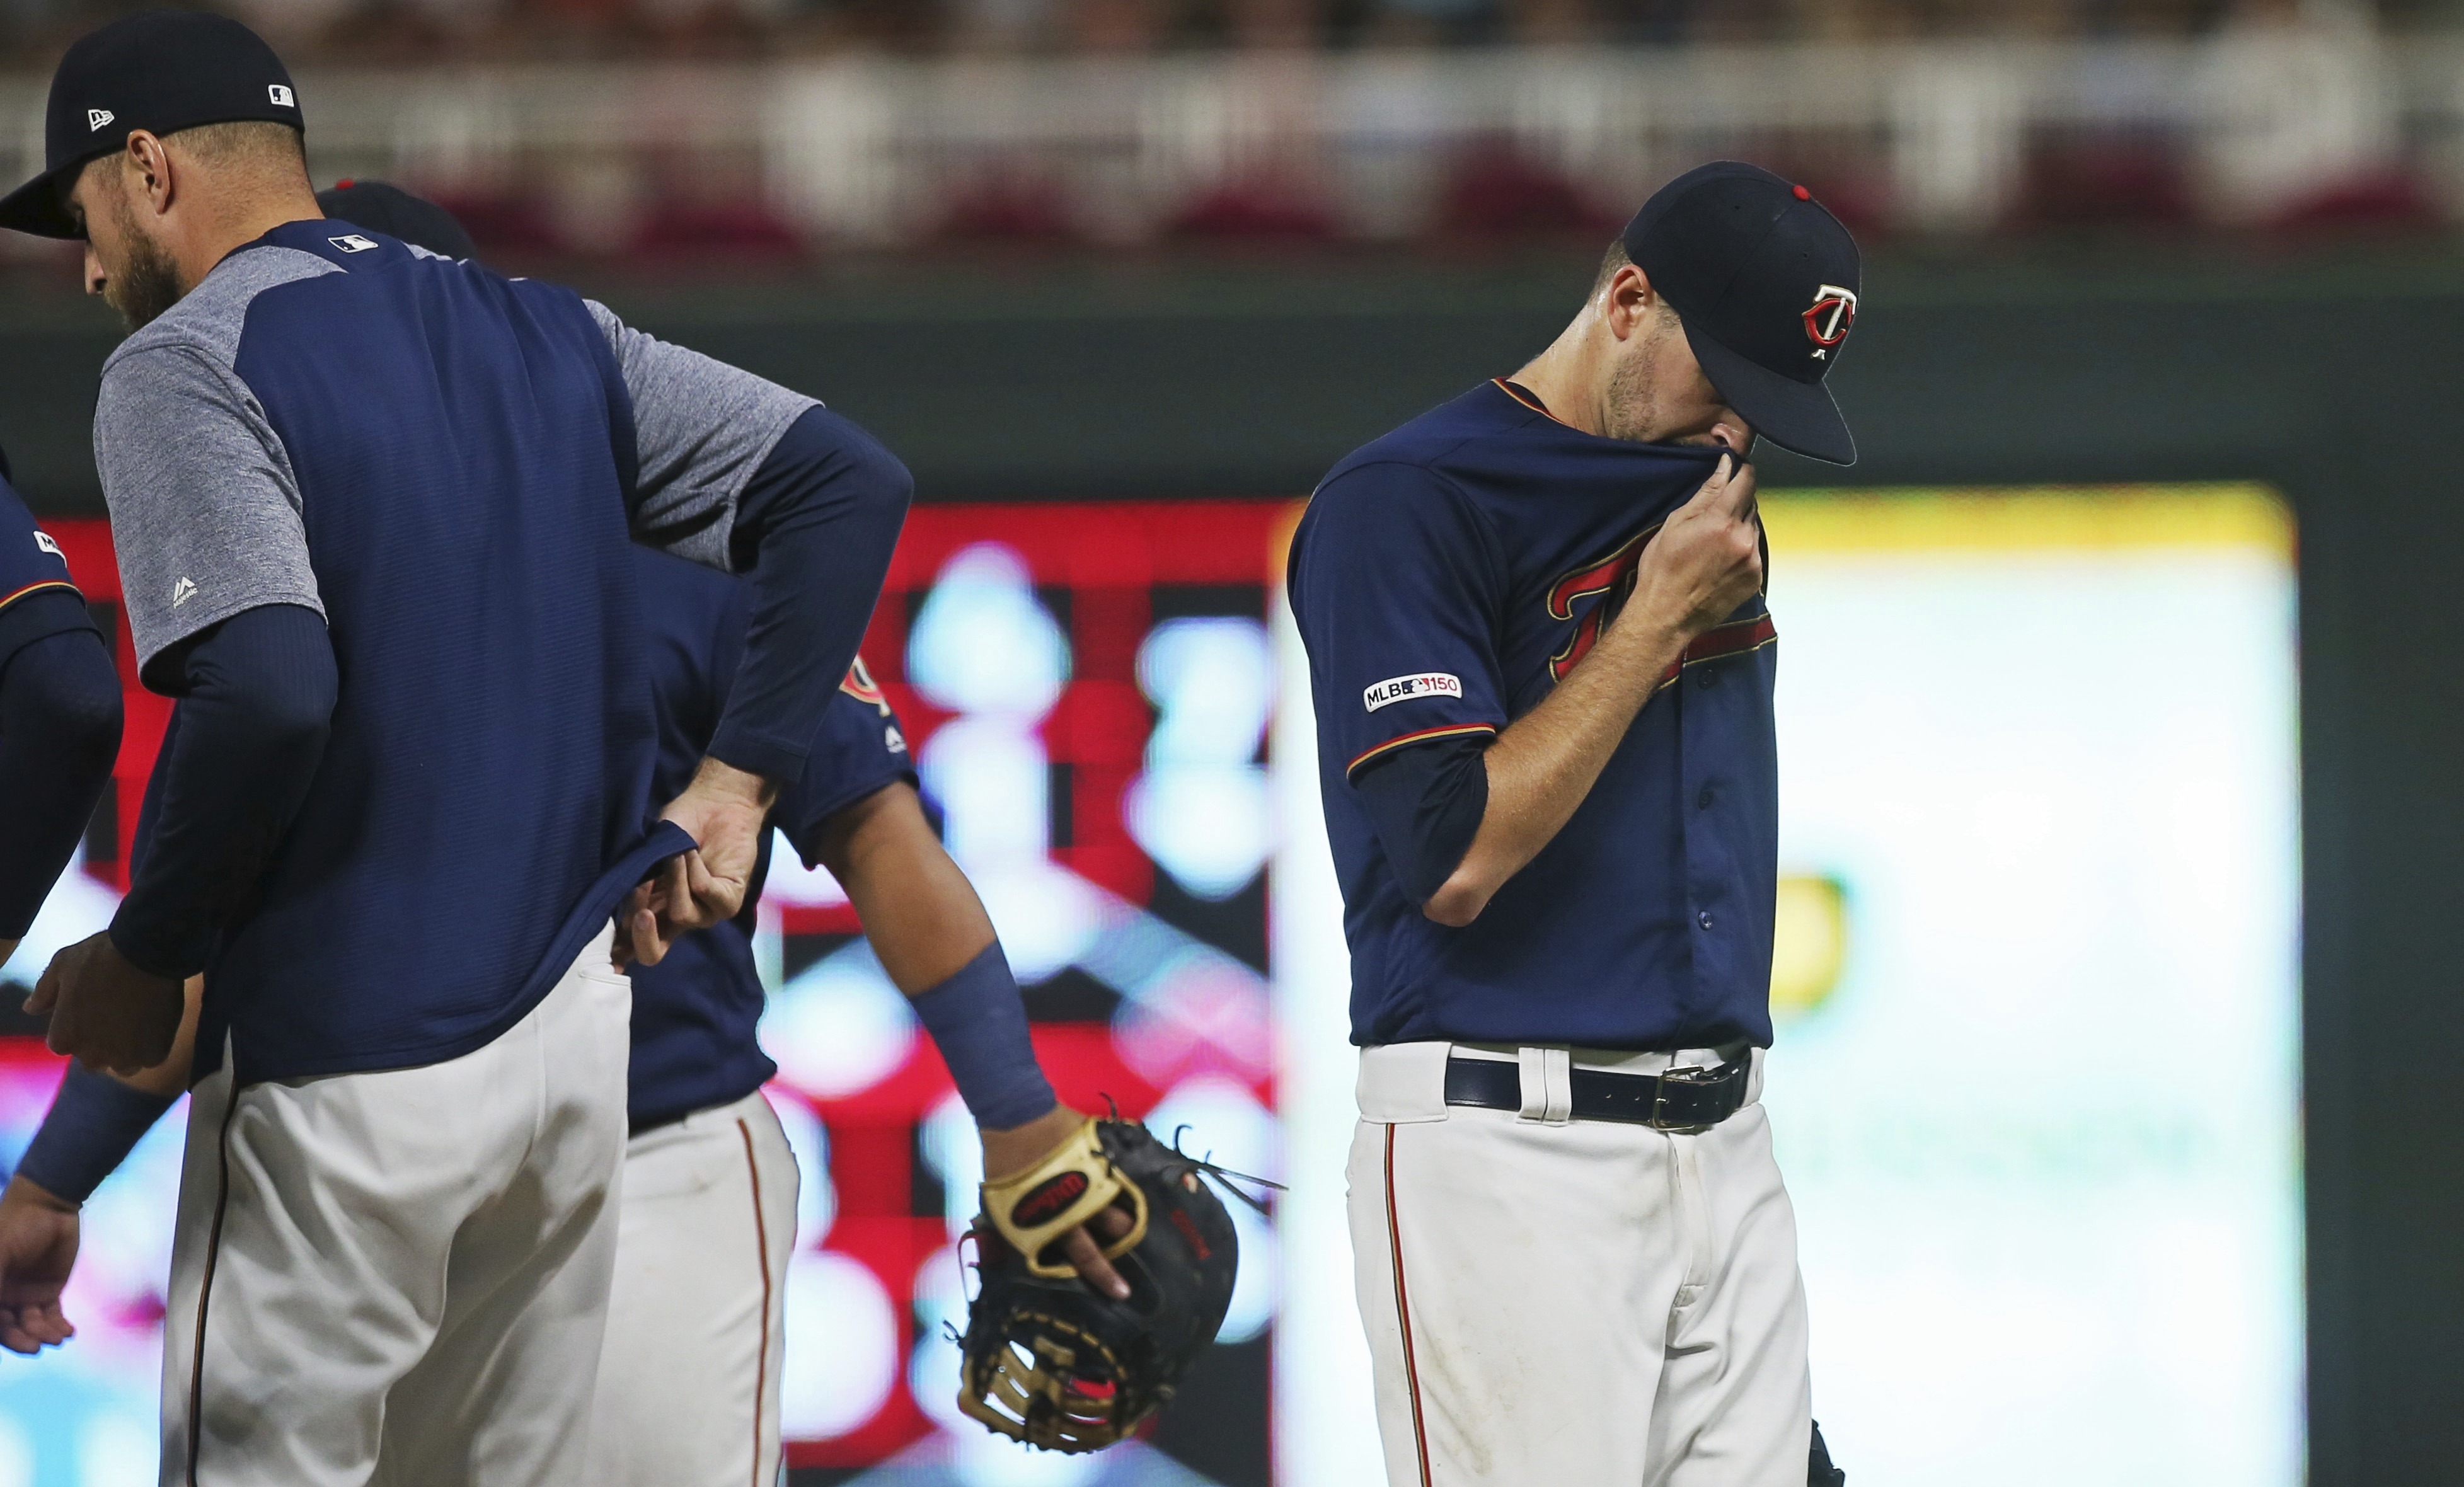 Twins lose 3-1 to White Sox, division lead trimmed to 4